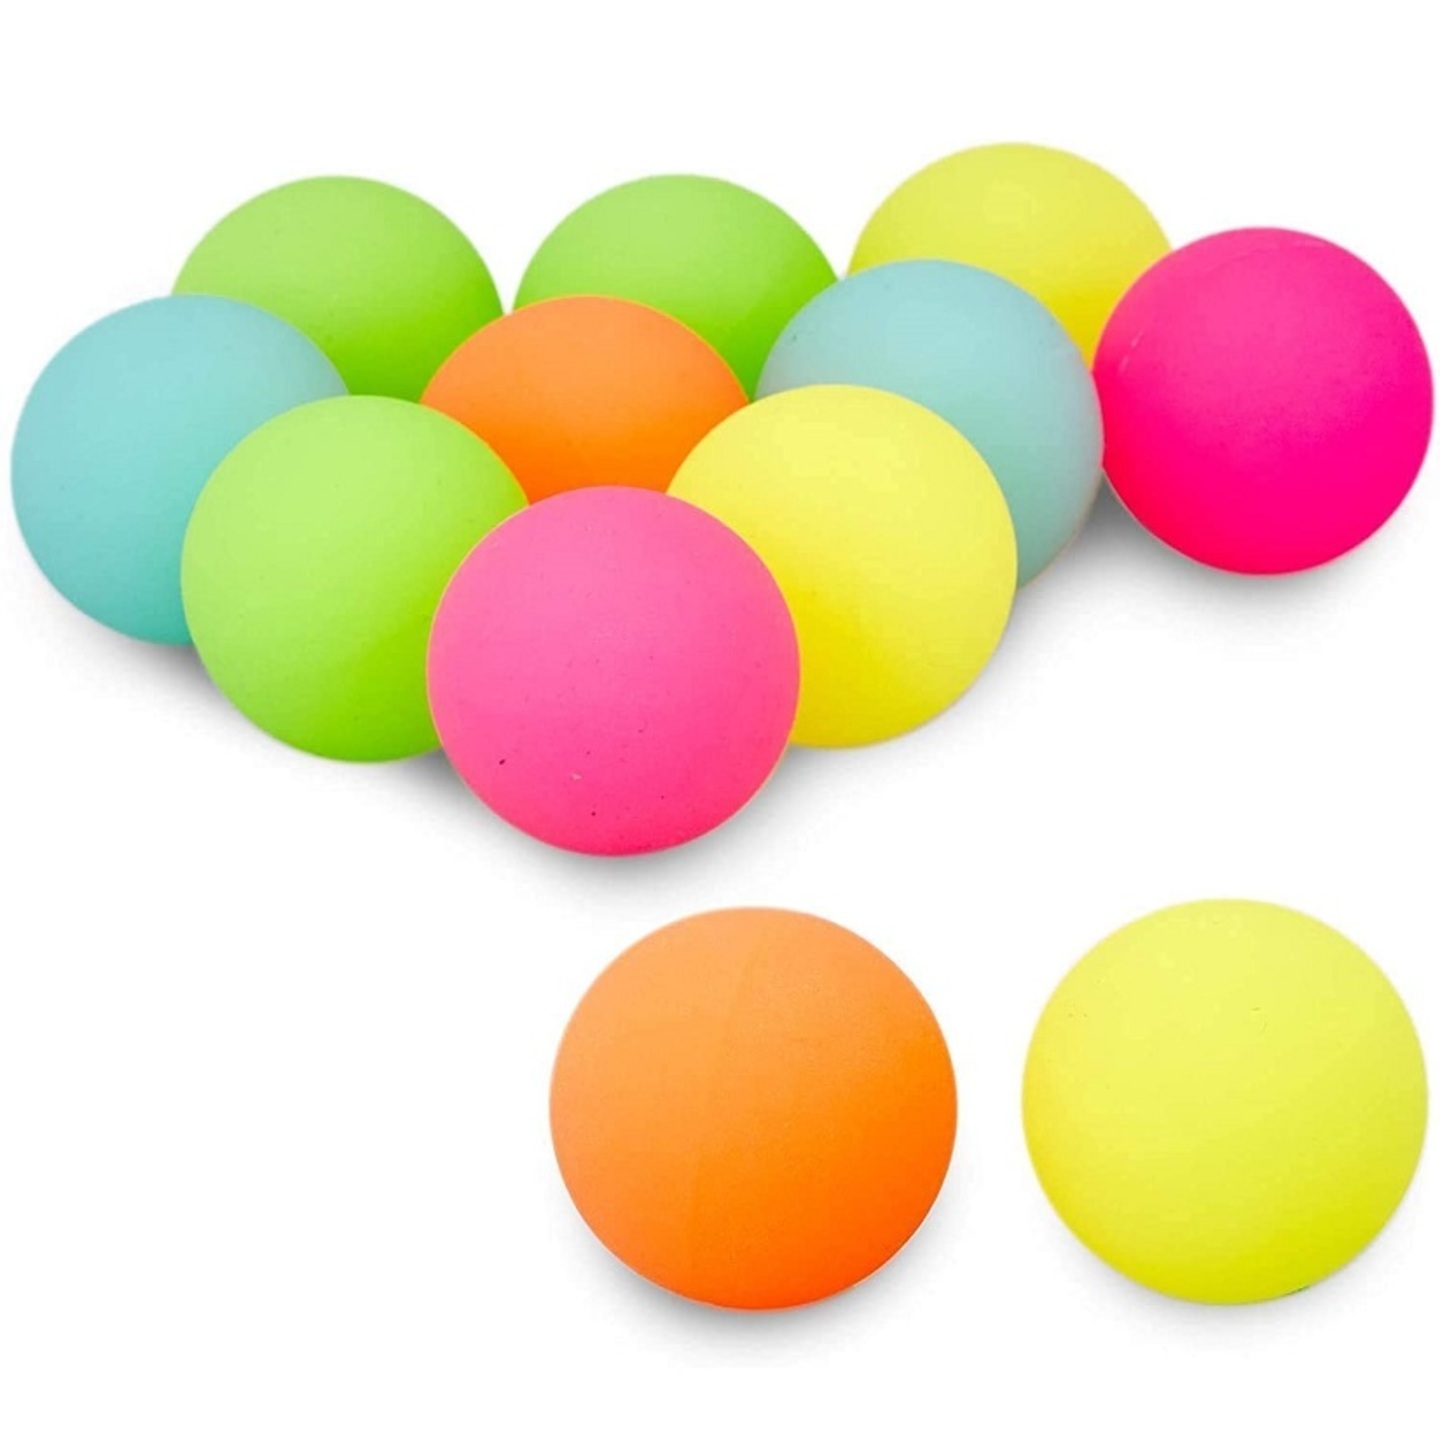 Colorful Mini Crazy Jumping / Bouncing Balls for Kids (Pack of 5)